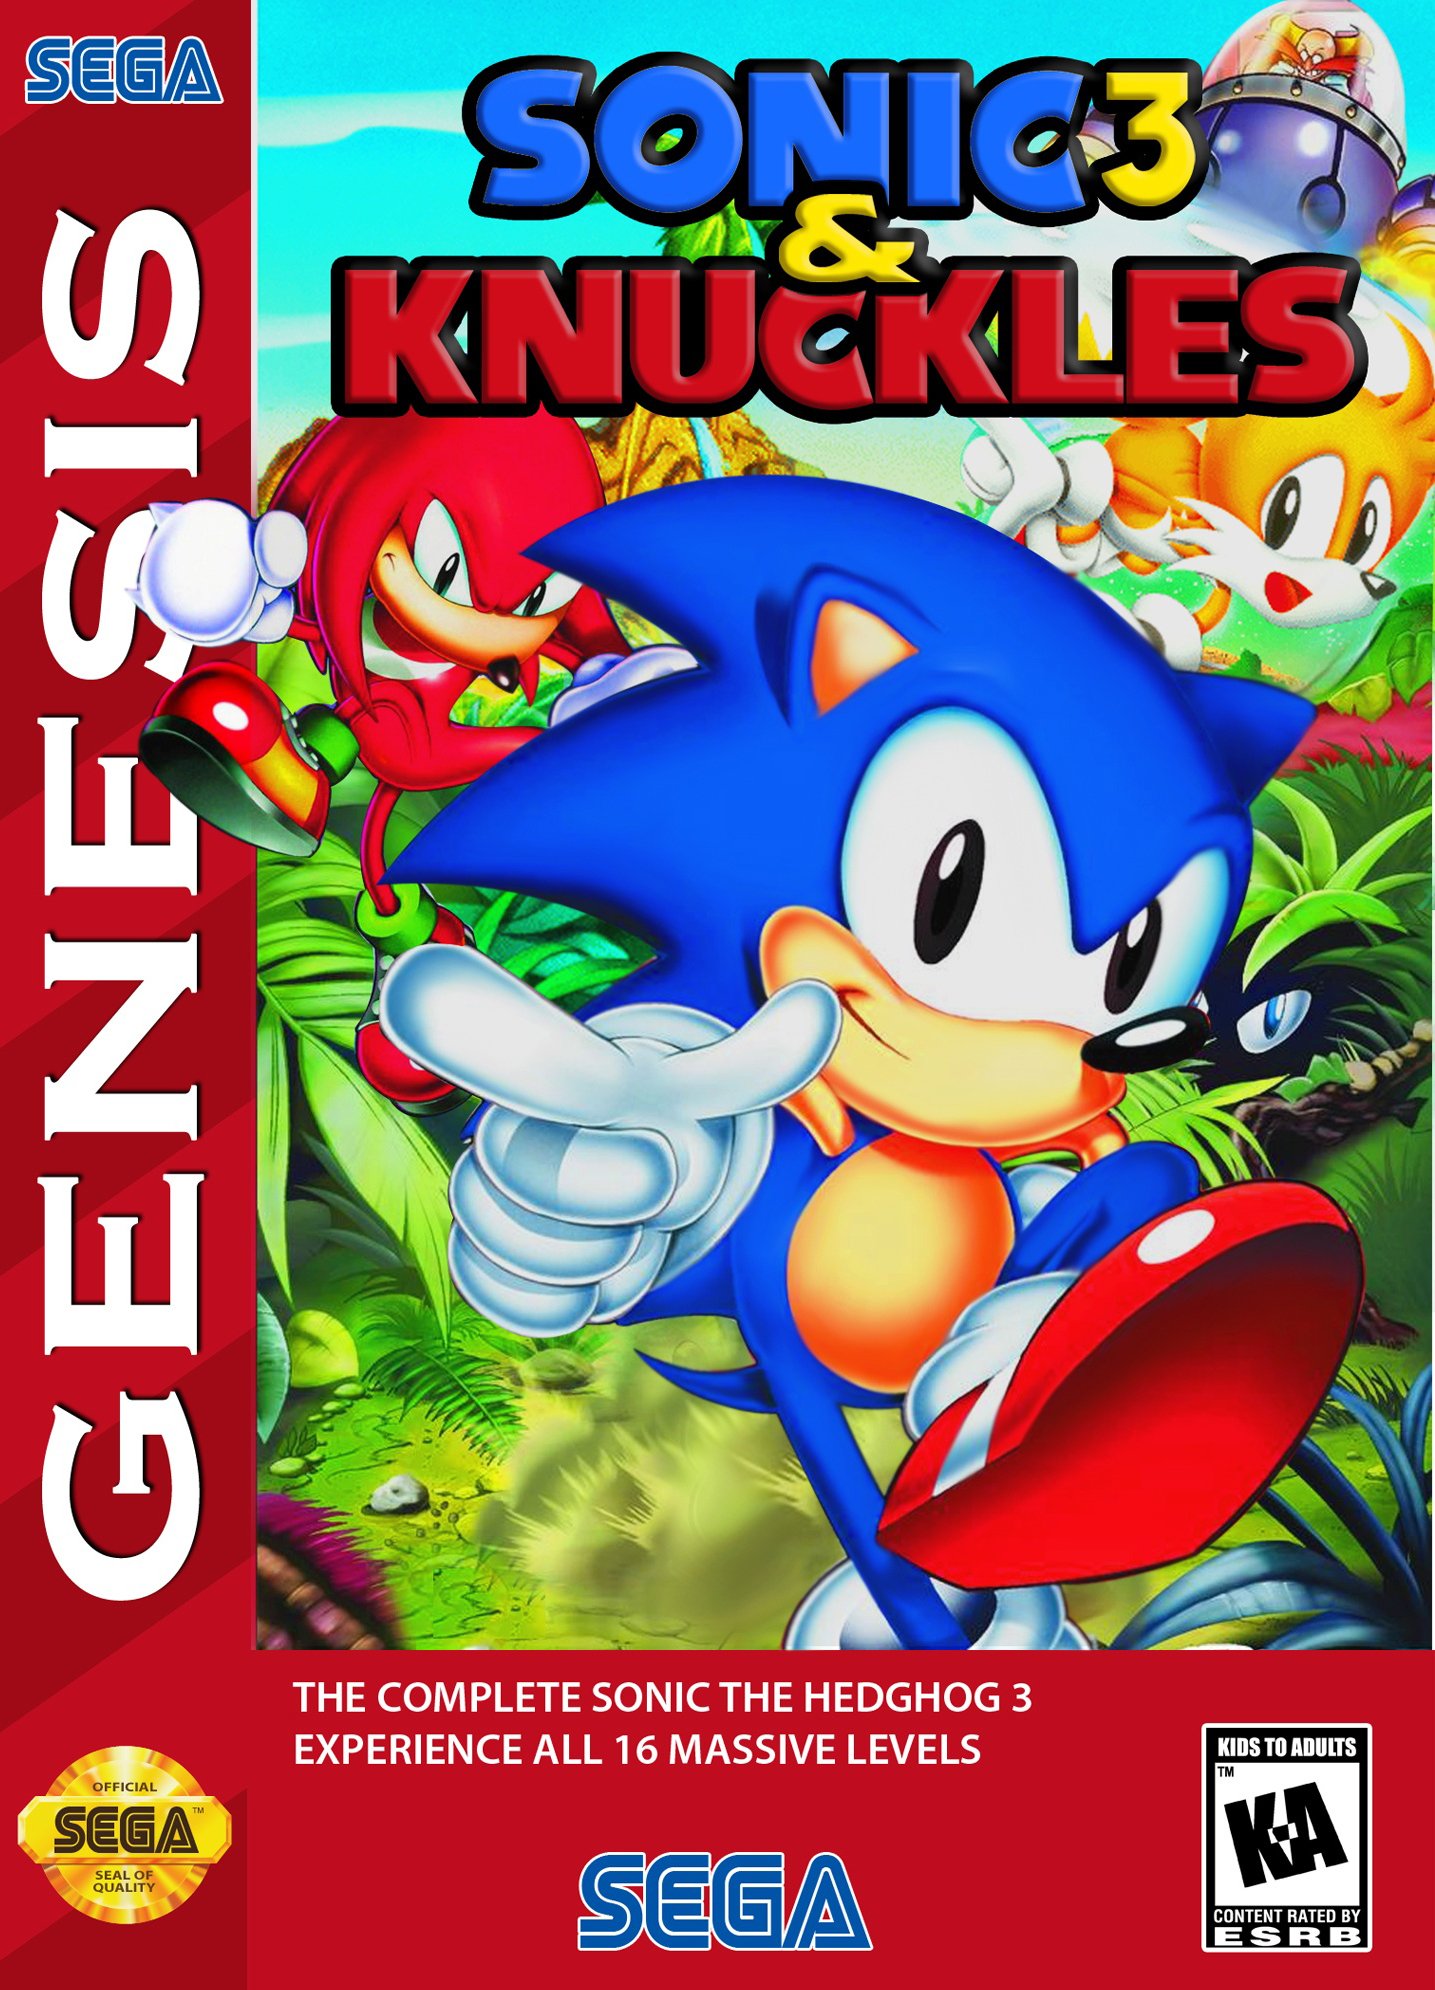 Sonic the Hedgehog 3 & Knuckles Picture - Image Abyss